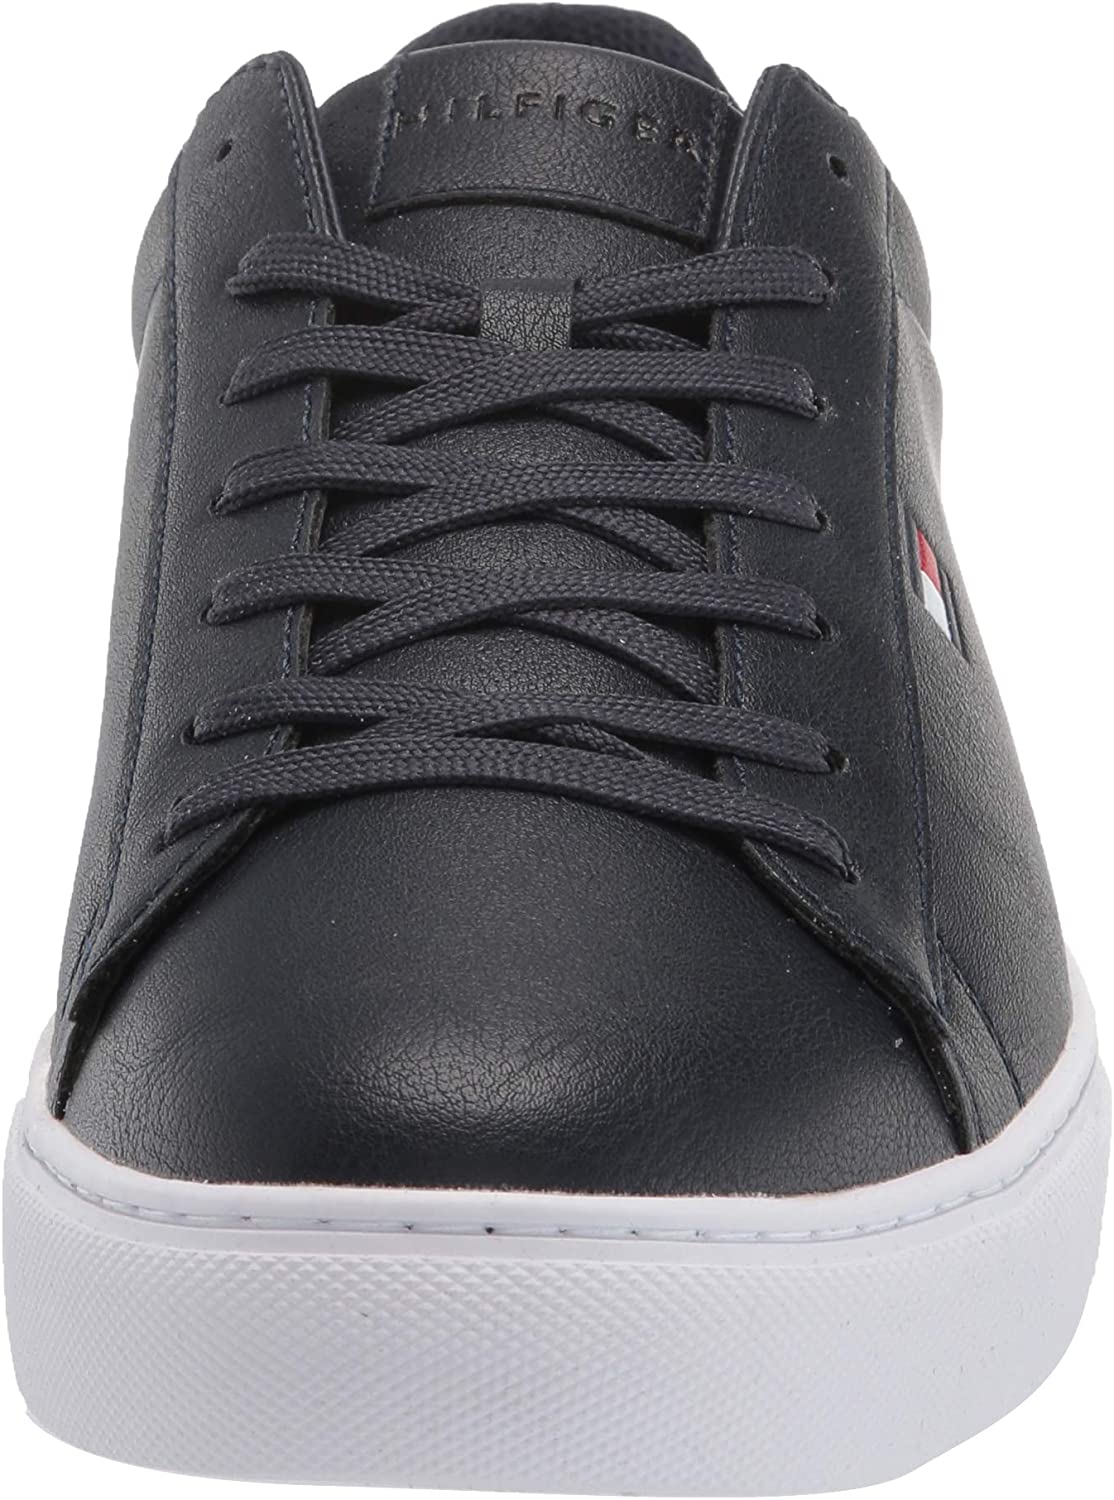 Tommy Hilfiger Men's BRECON Sneakers Shoes, Navy